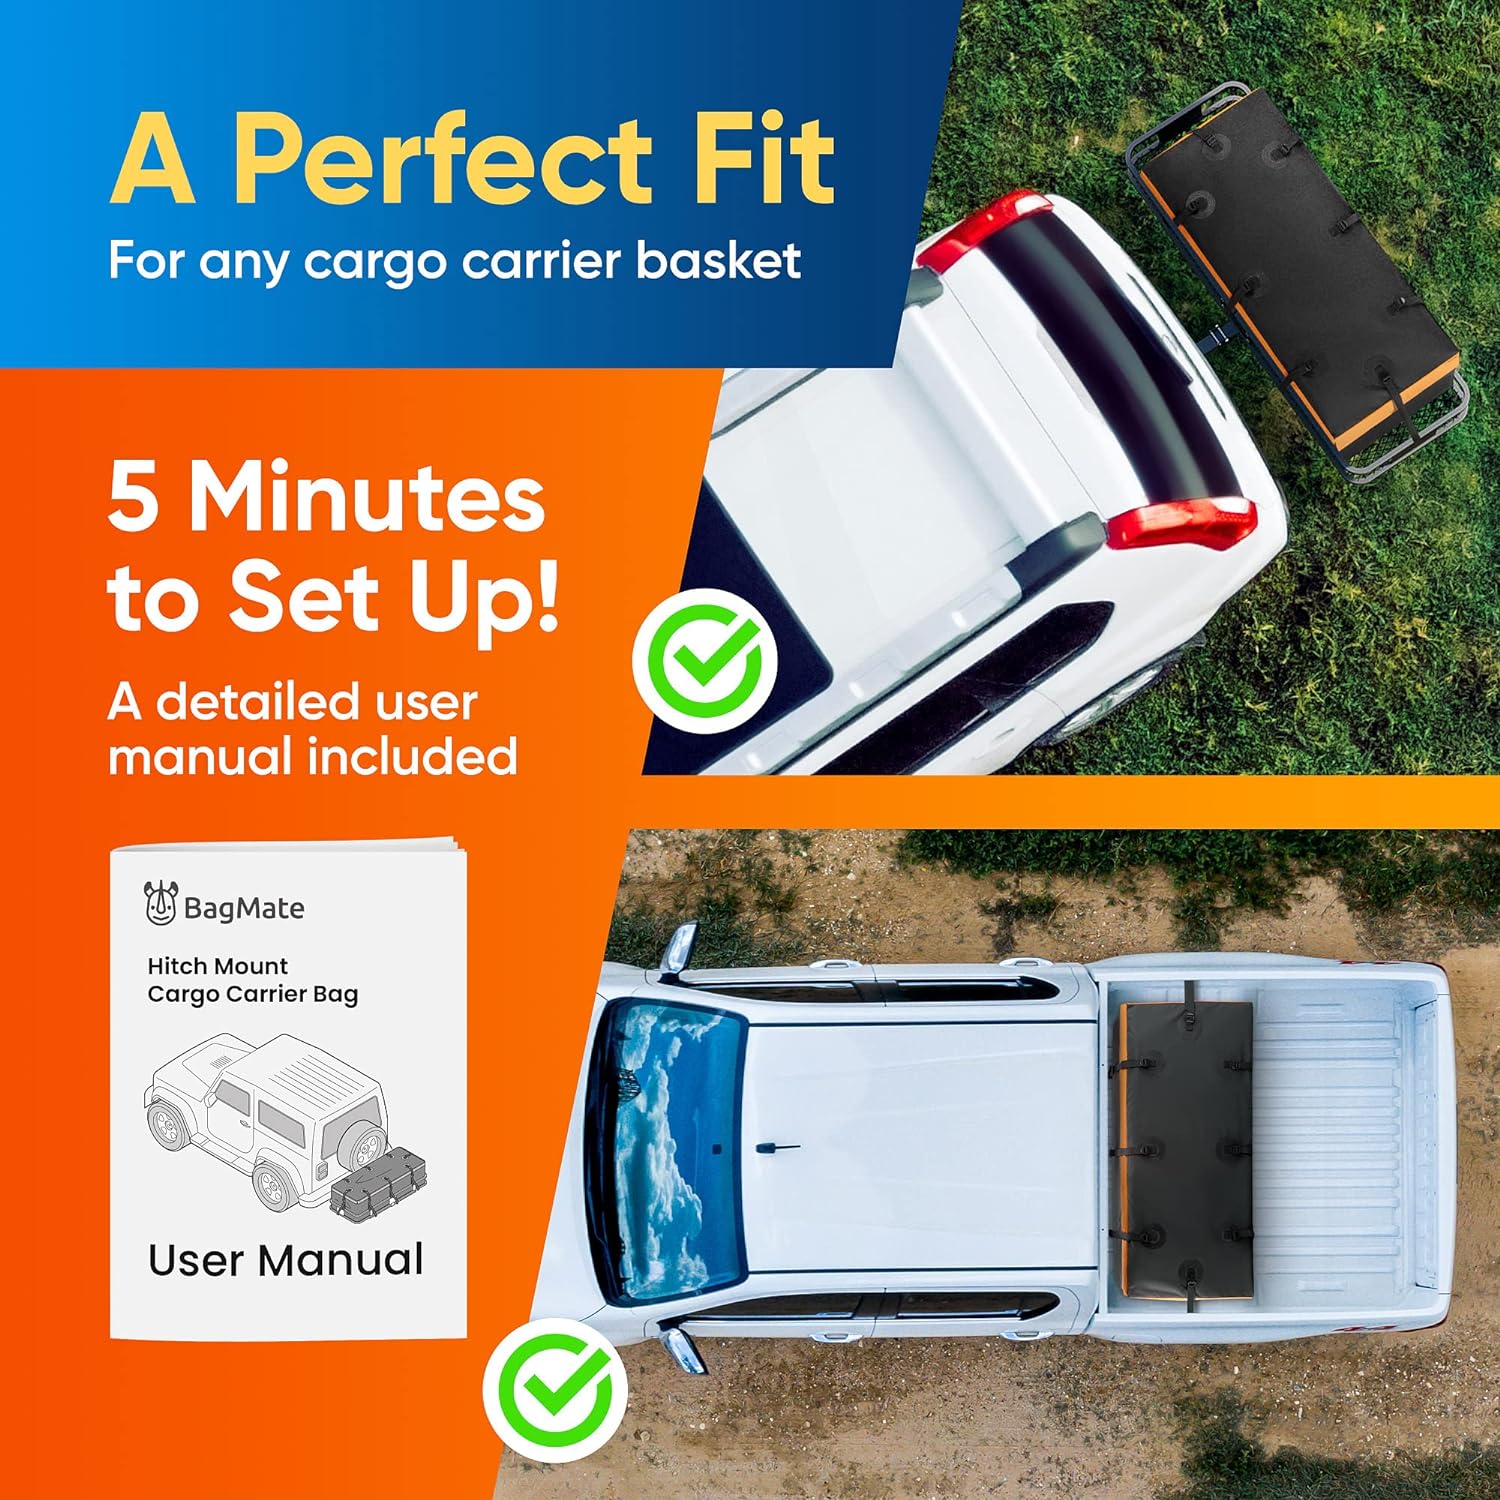 BagMate 565L Waterproof Hitch Cargo Carrier Bag - Durable PVC Tarpaulin Hitch Mount Cargo Carrier Cargo Box - Heavy-Duty Straps & Buckles